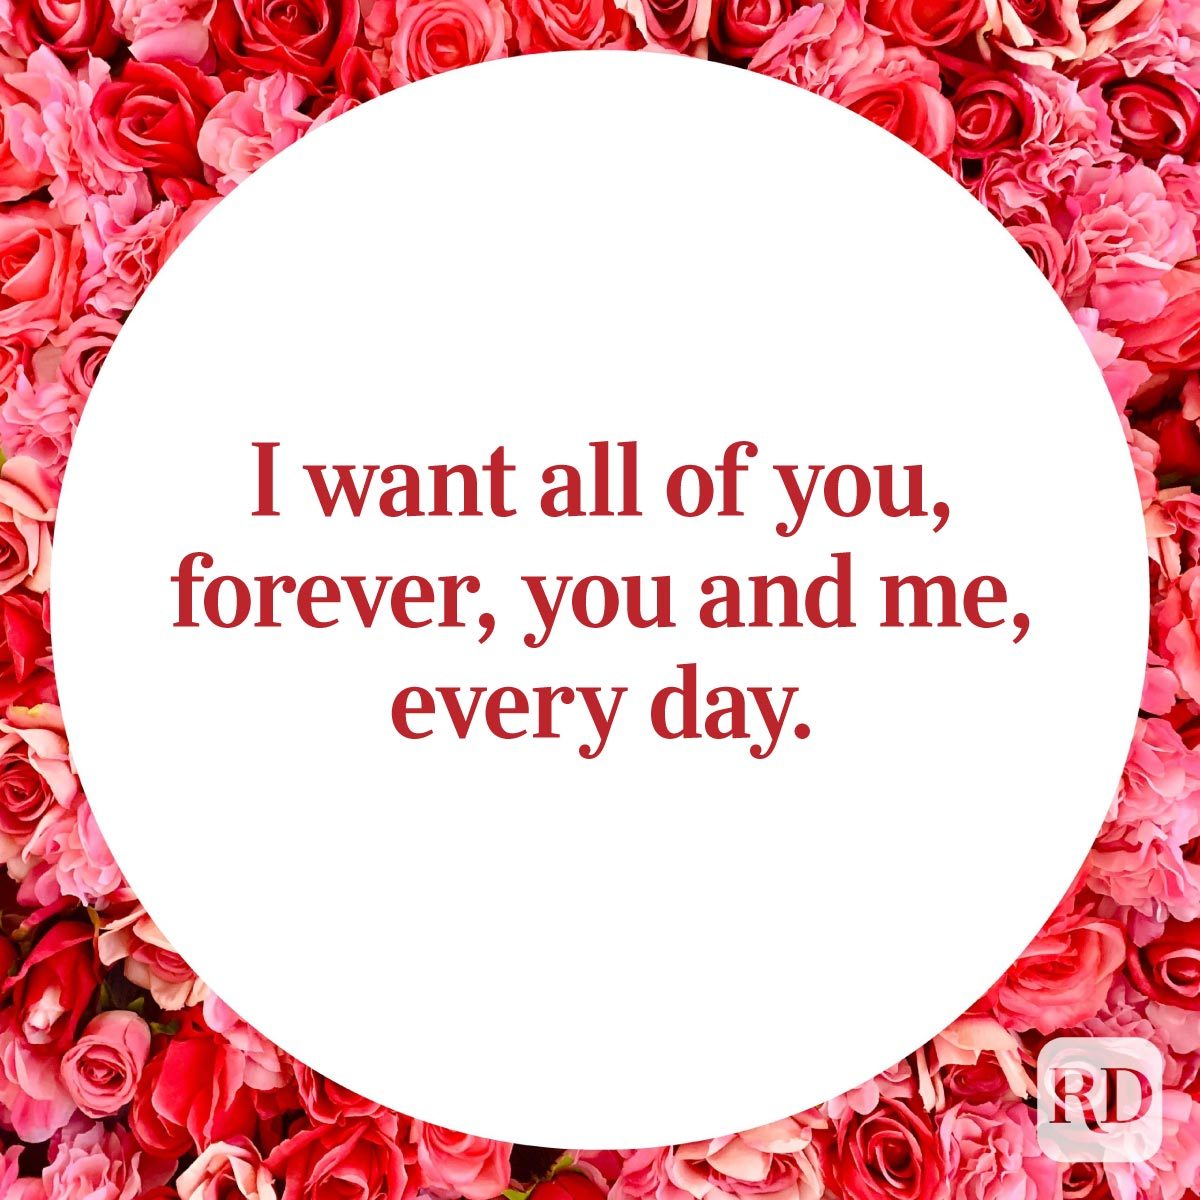 100 Valentine's Day Card Messages and Quotes for Loved Ones